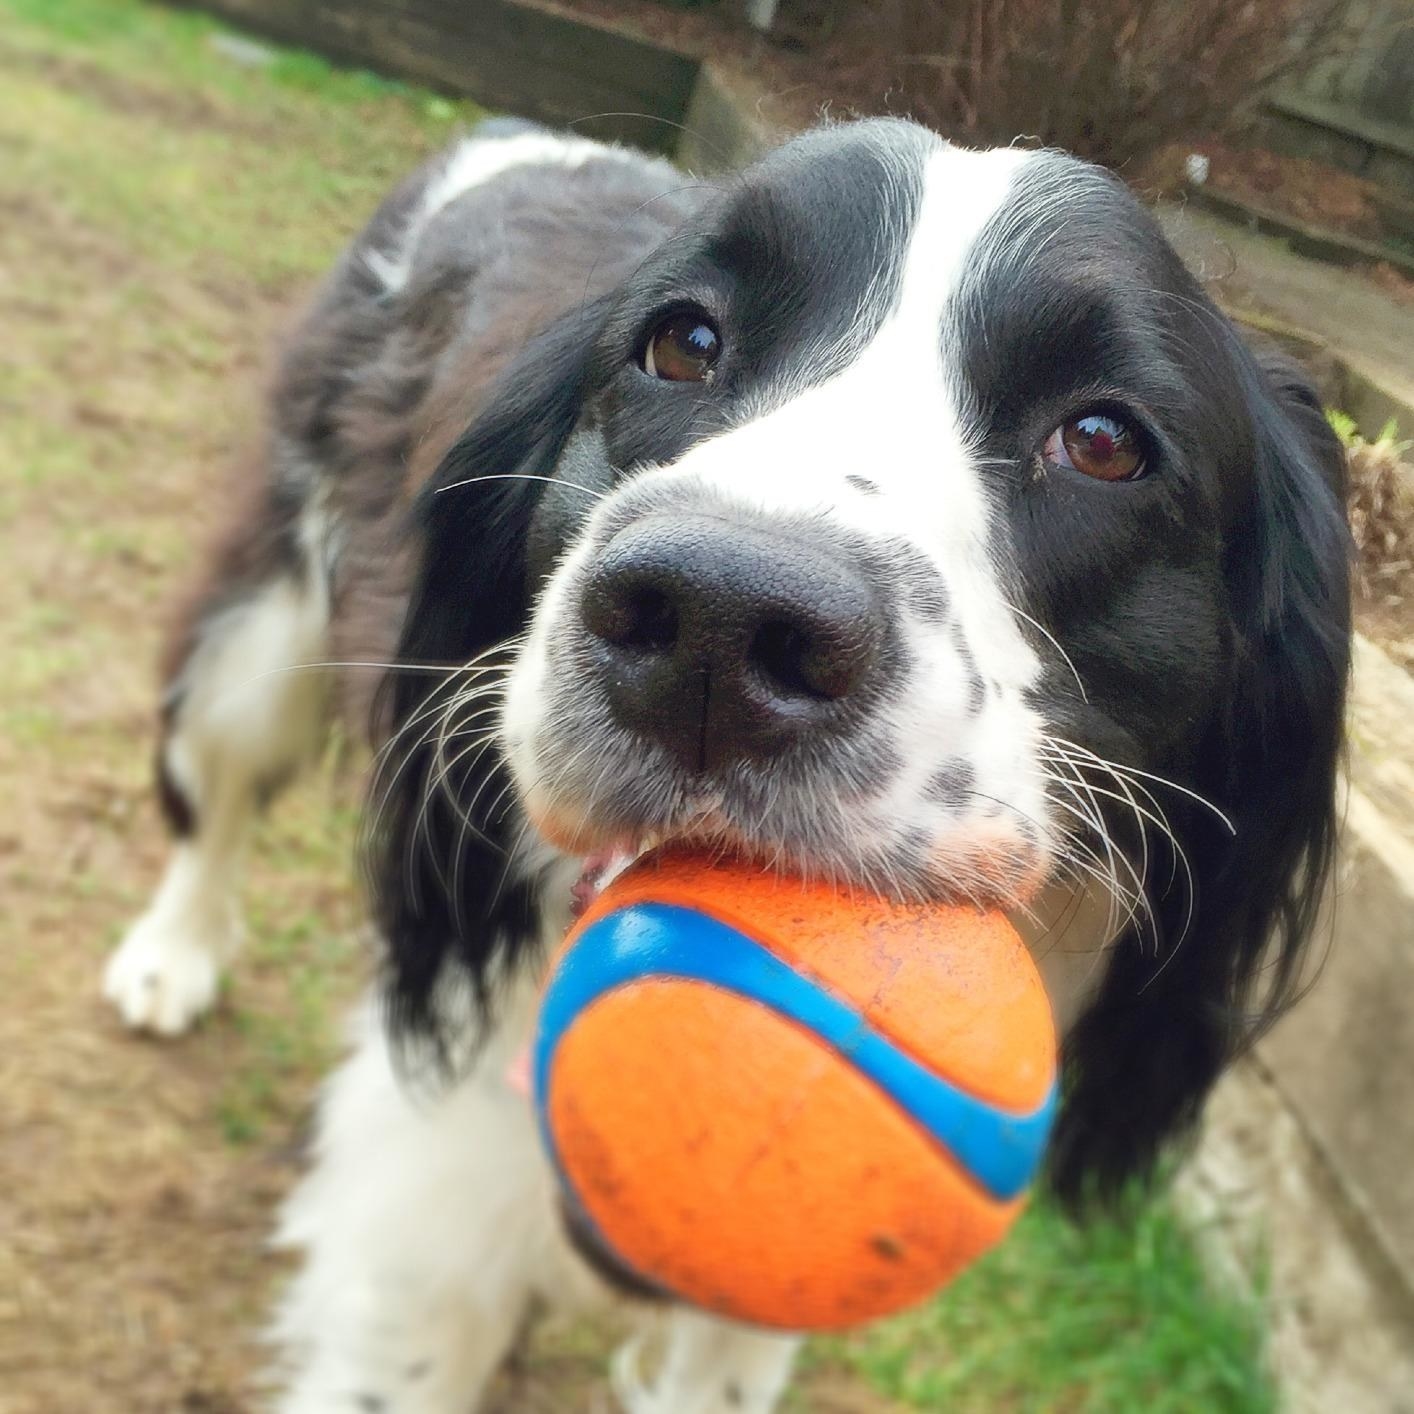 A black and white dog with the orange and blue ball in its mouth